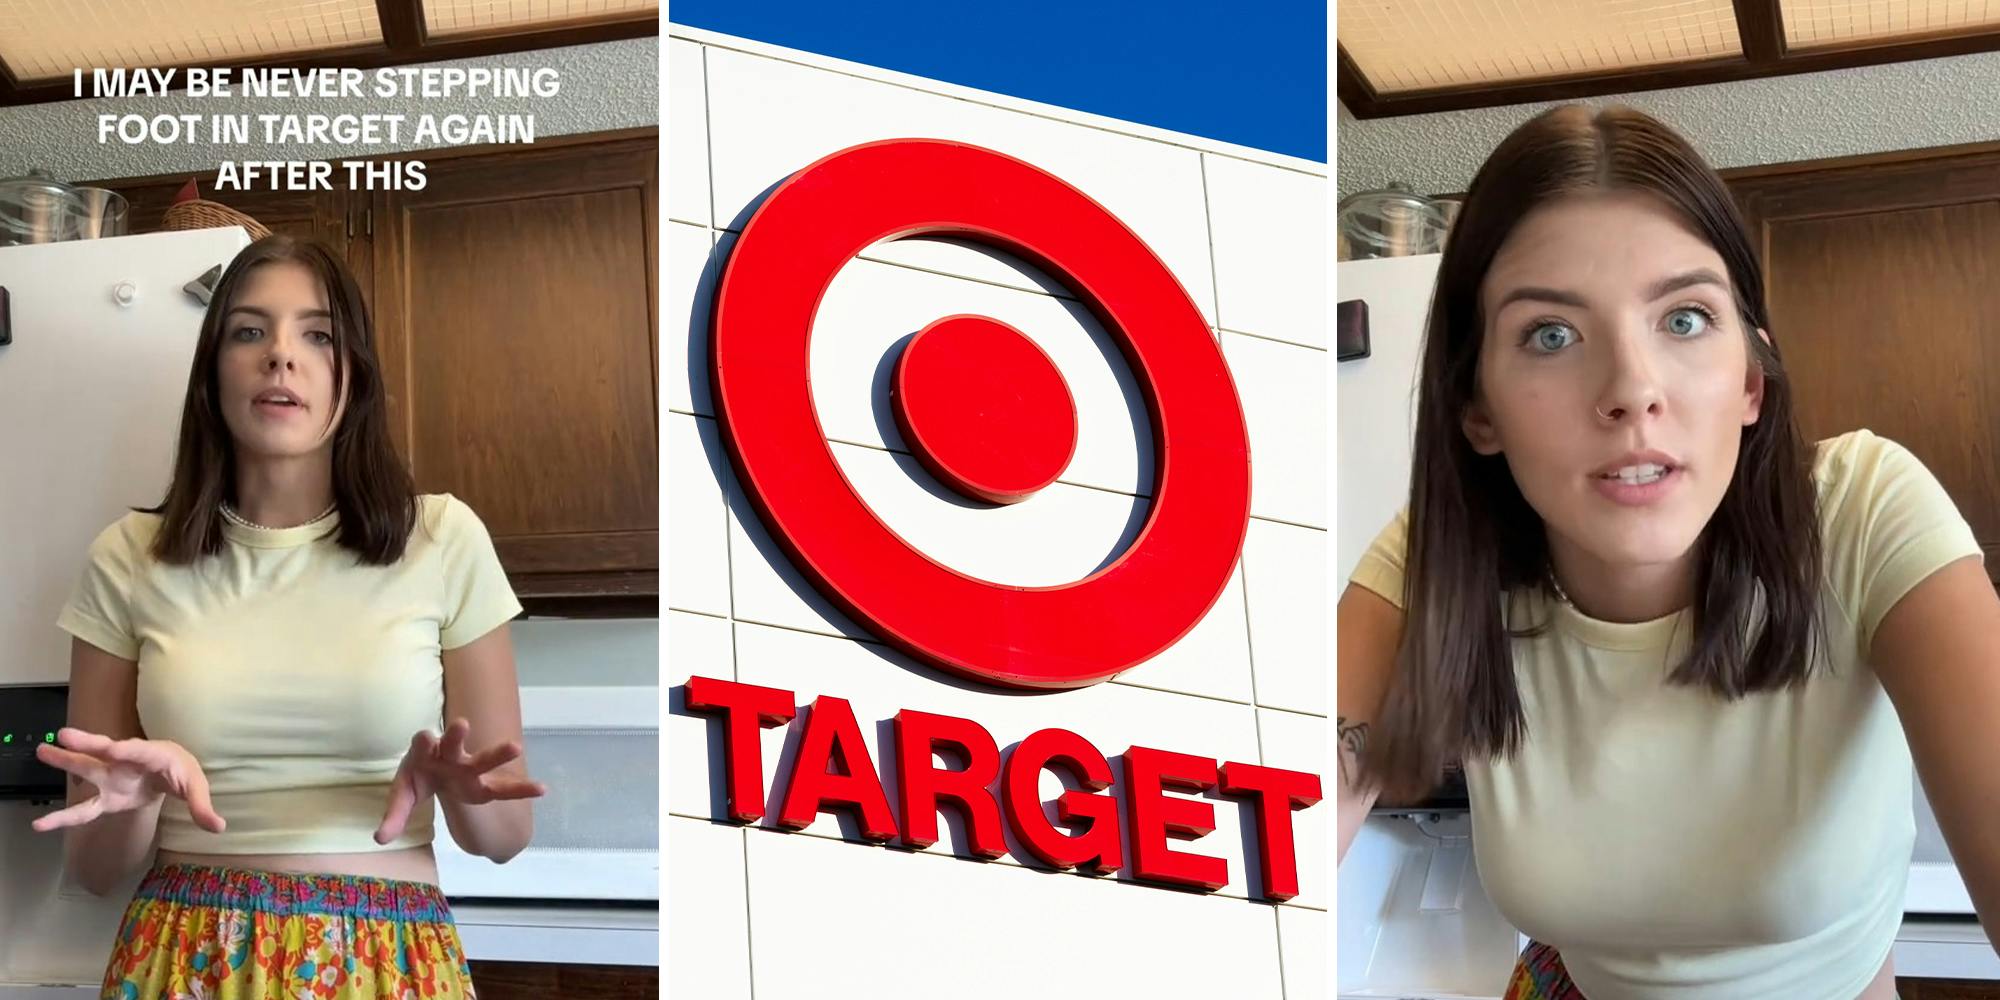 ‘I may never shop at a Target again after this’: Mom slams Target for how it’s marketing its baby wipes